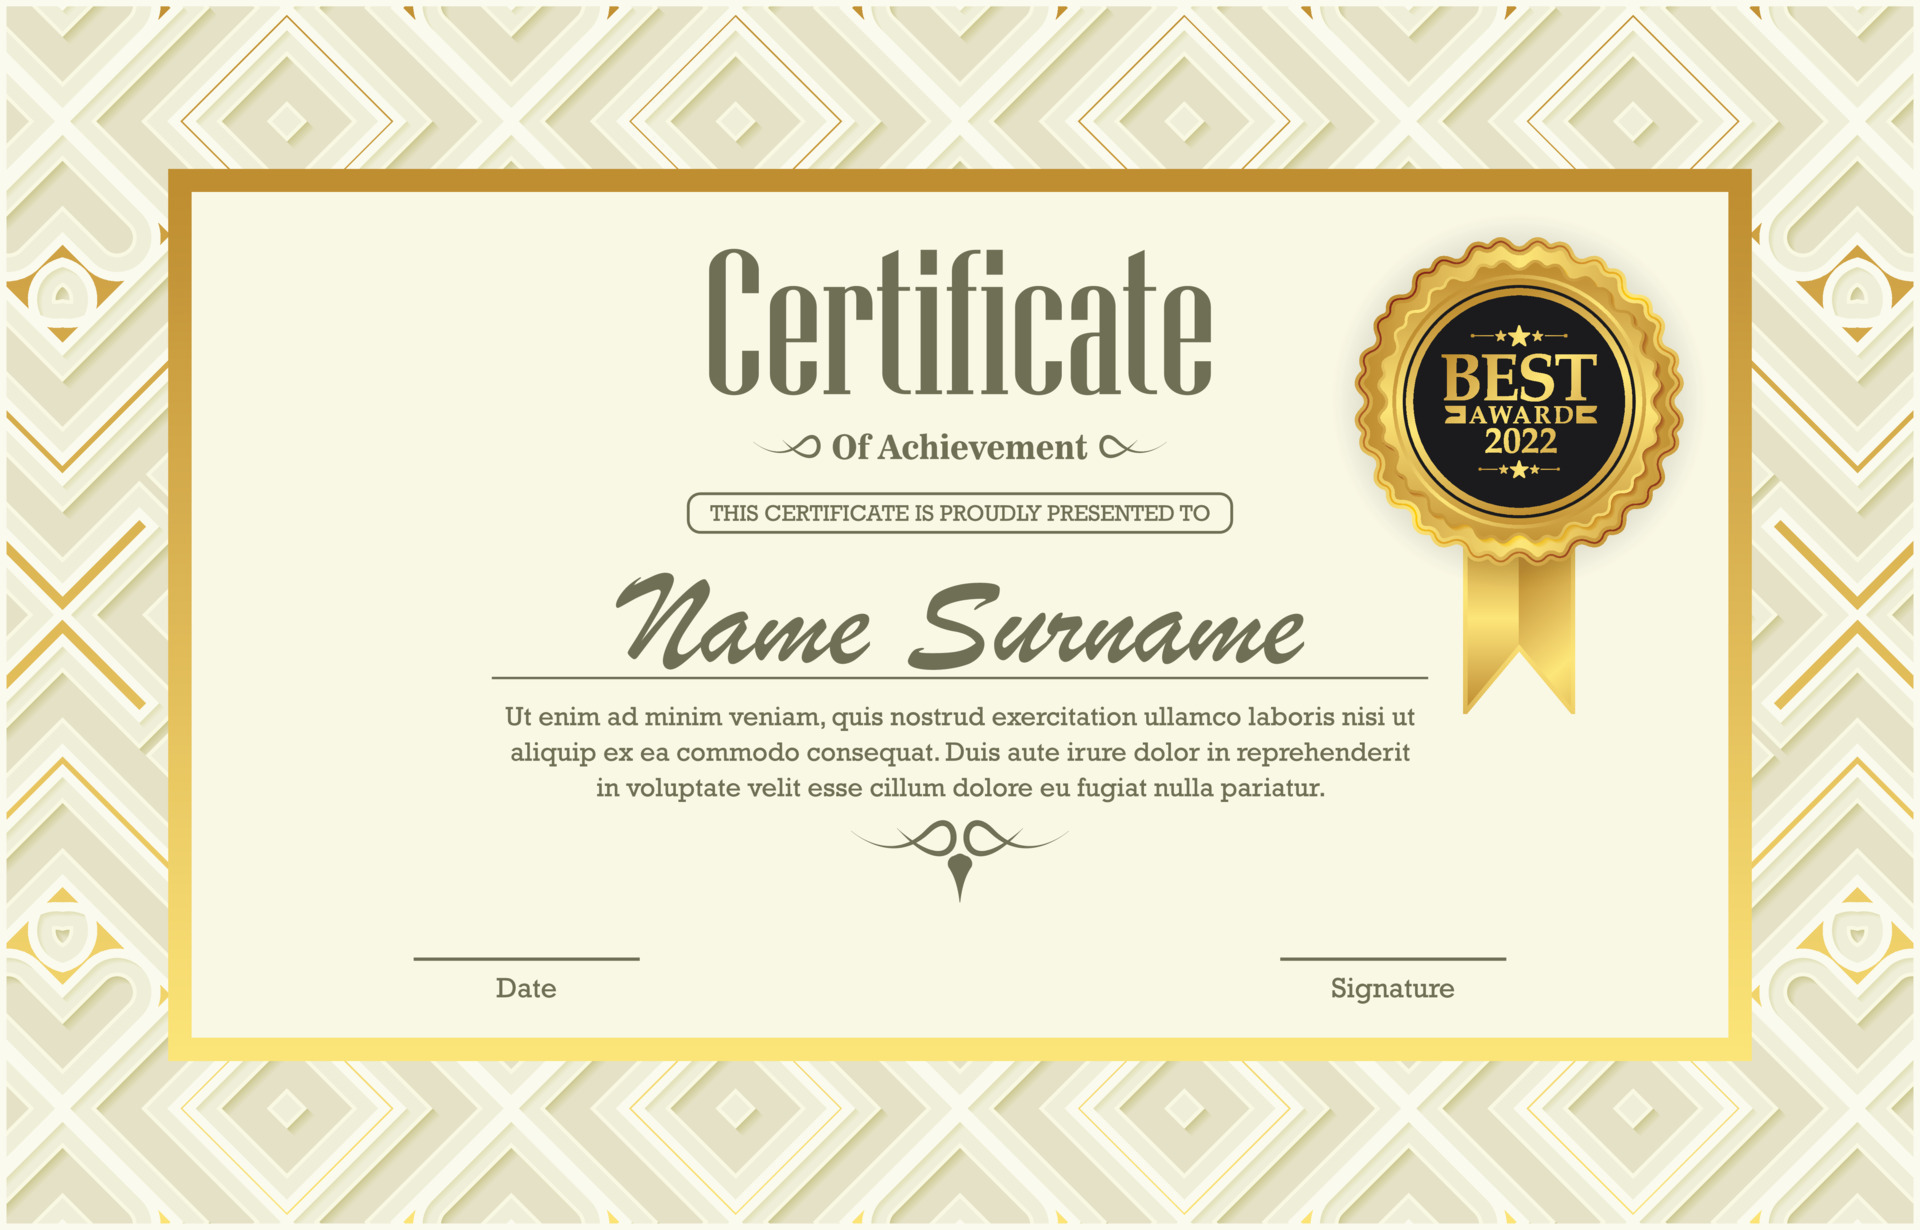 Certificate of achievement template with vintage gold border - Vector ...